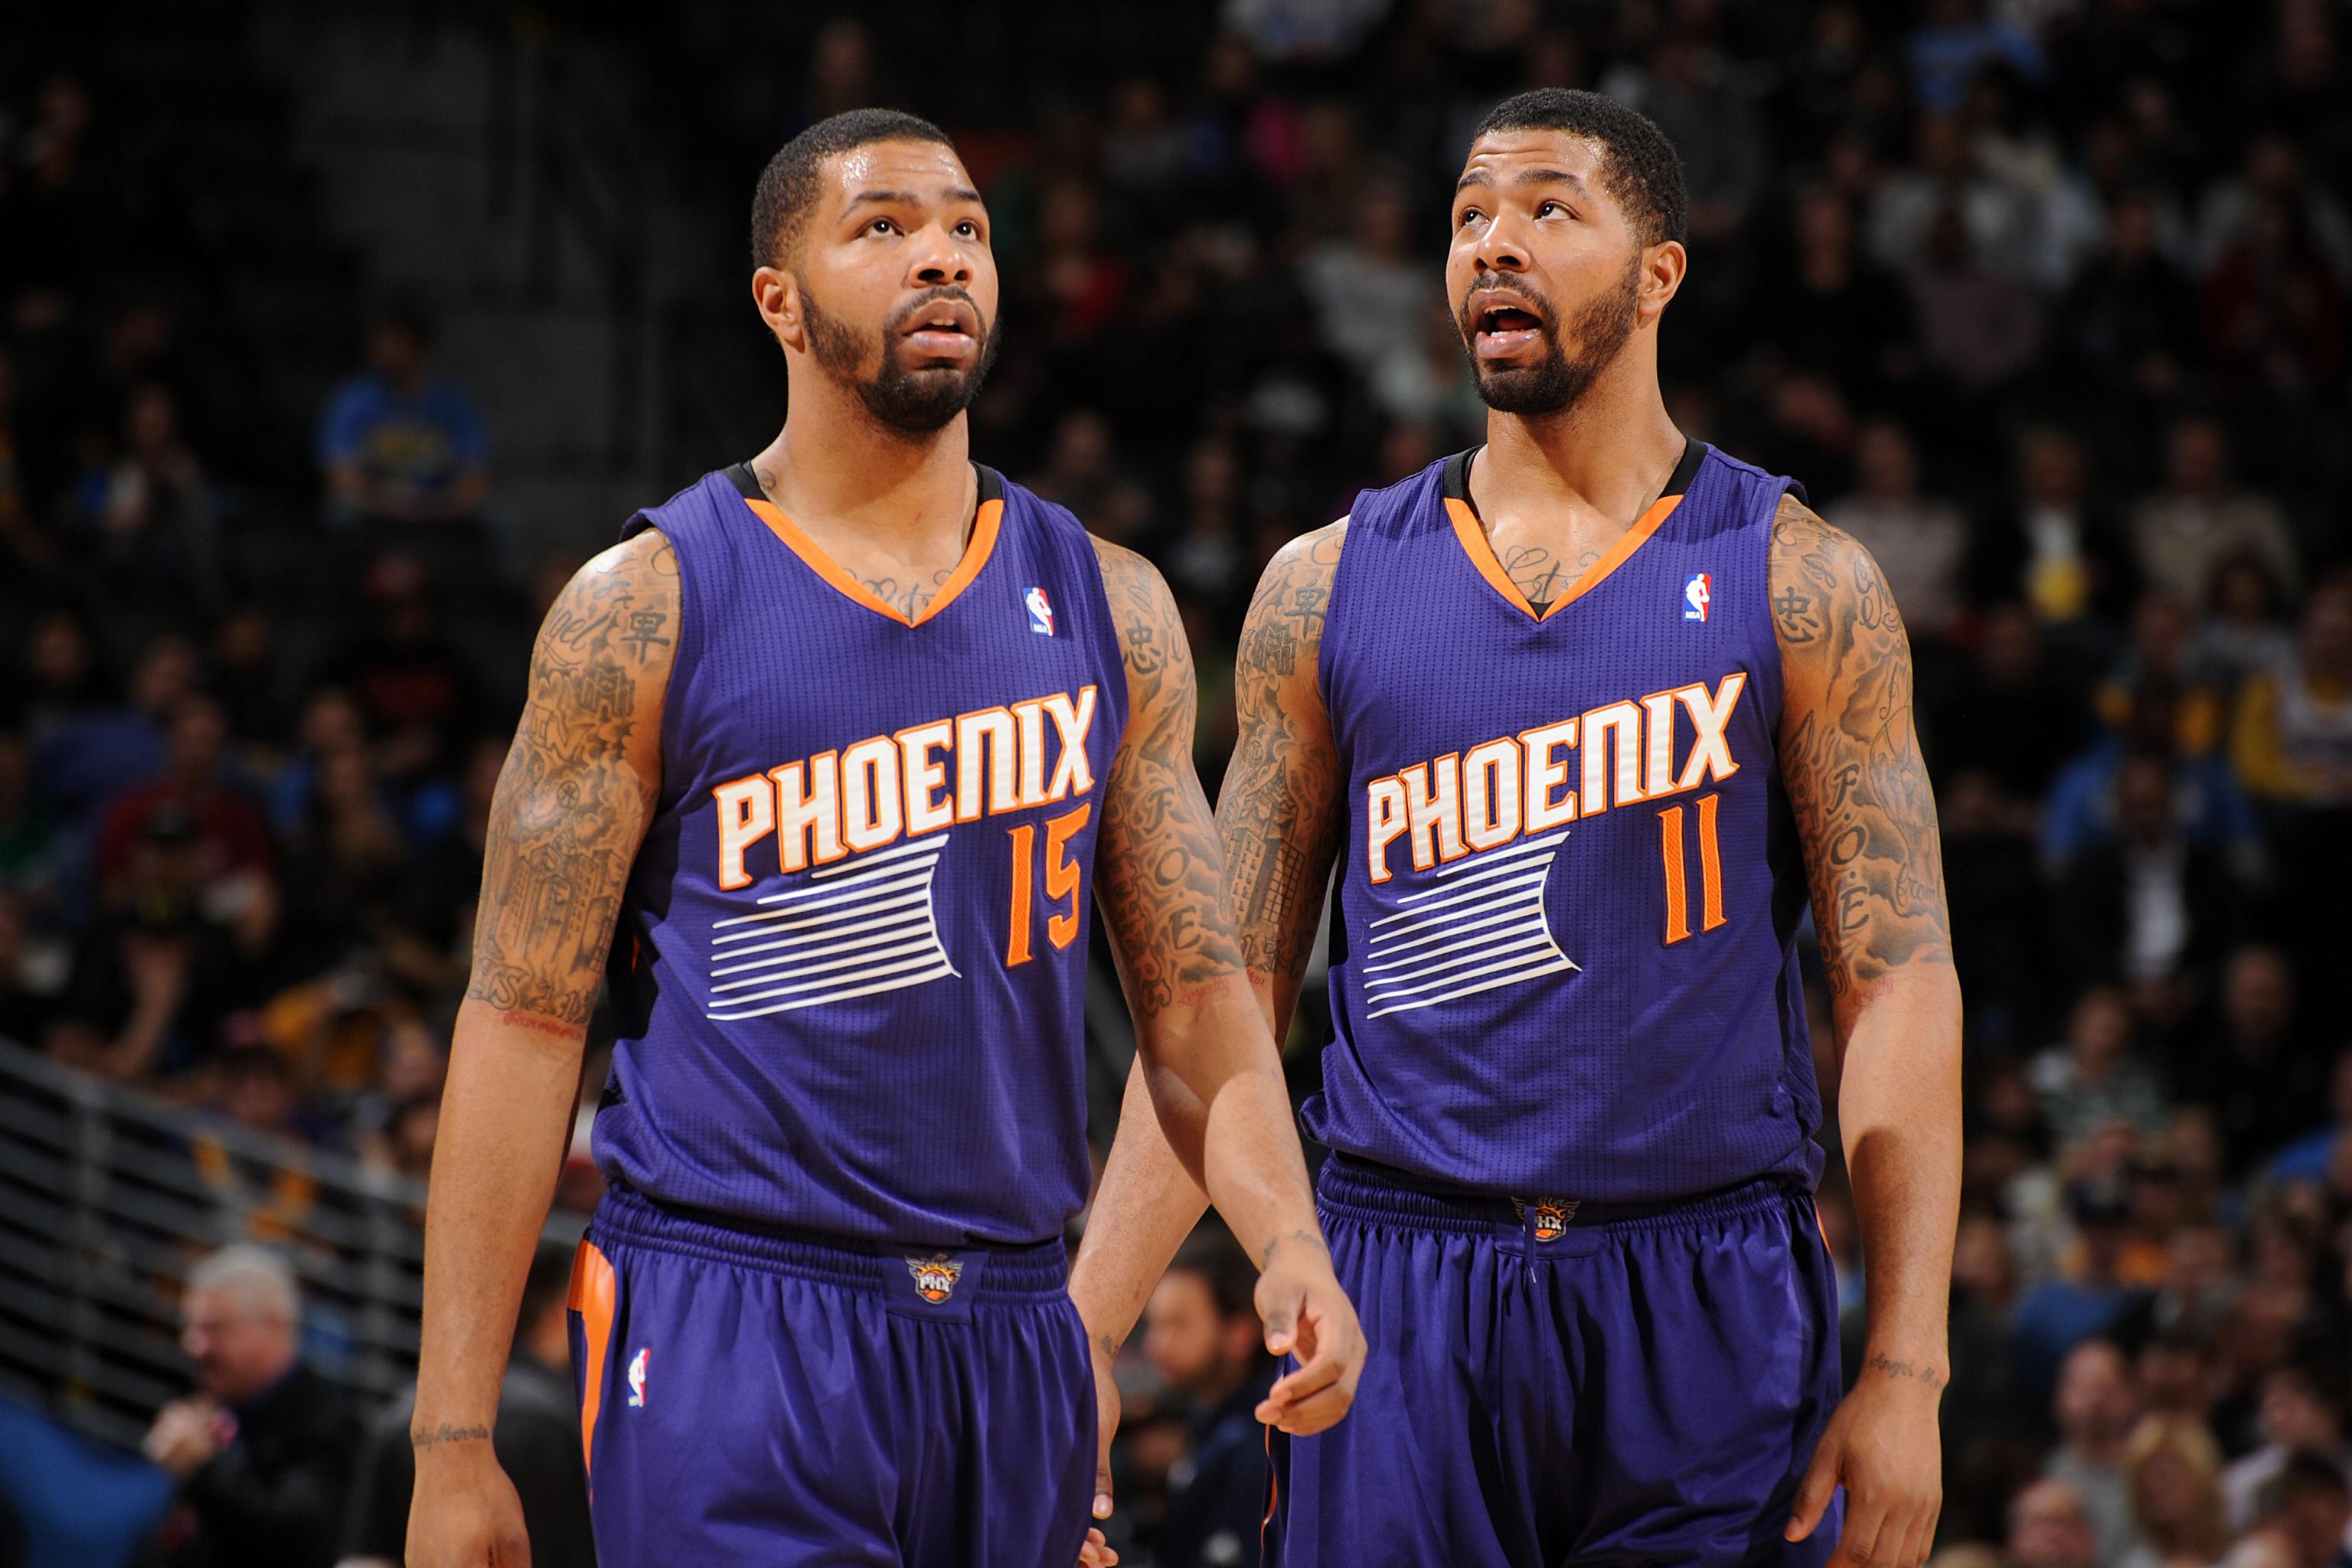 Phoenix Suns' Marcus Morris (15) and his twin brother Markieff Morris (11)  take the court during a time out during the second half of an NBA  basketball game against the Utah Jazz